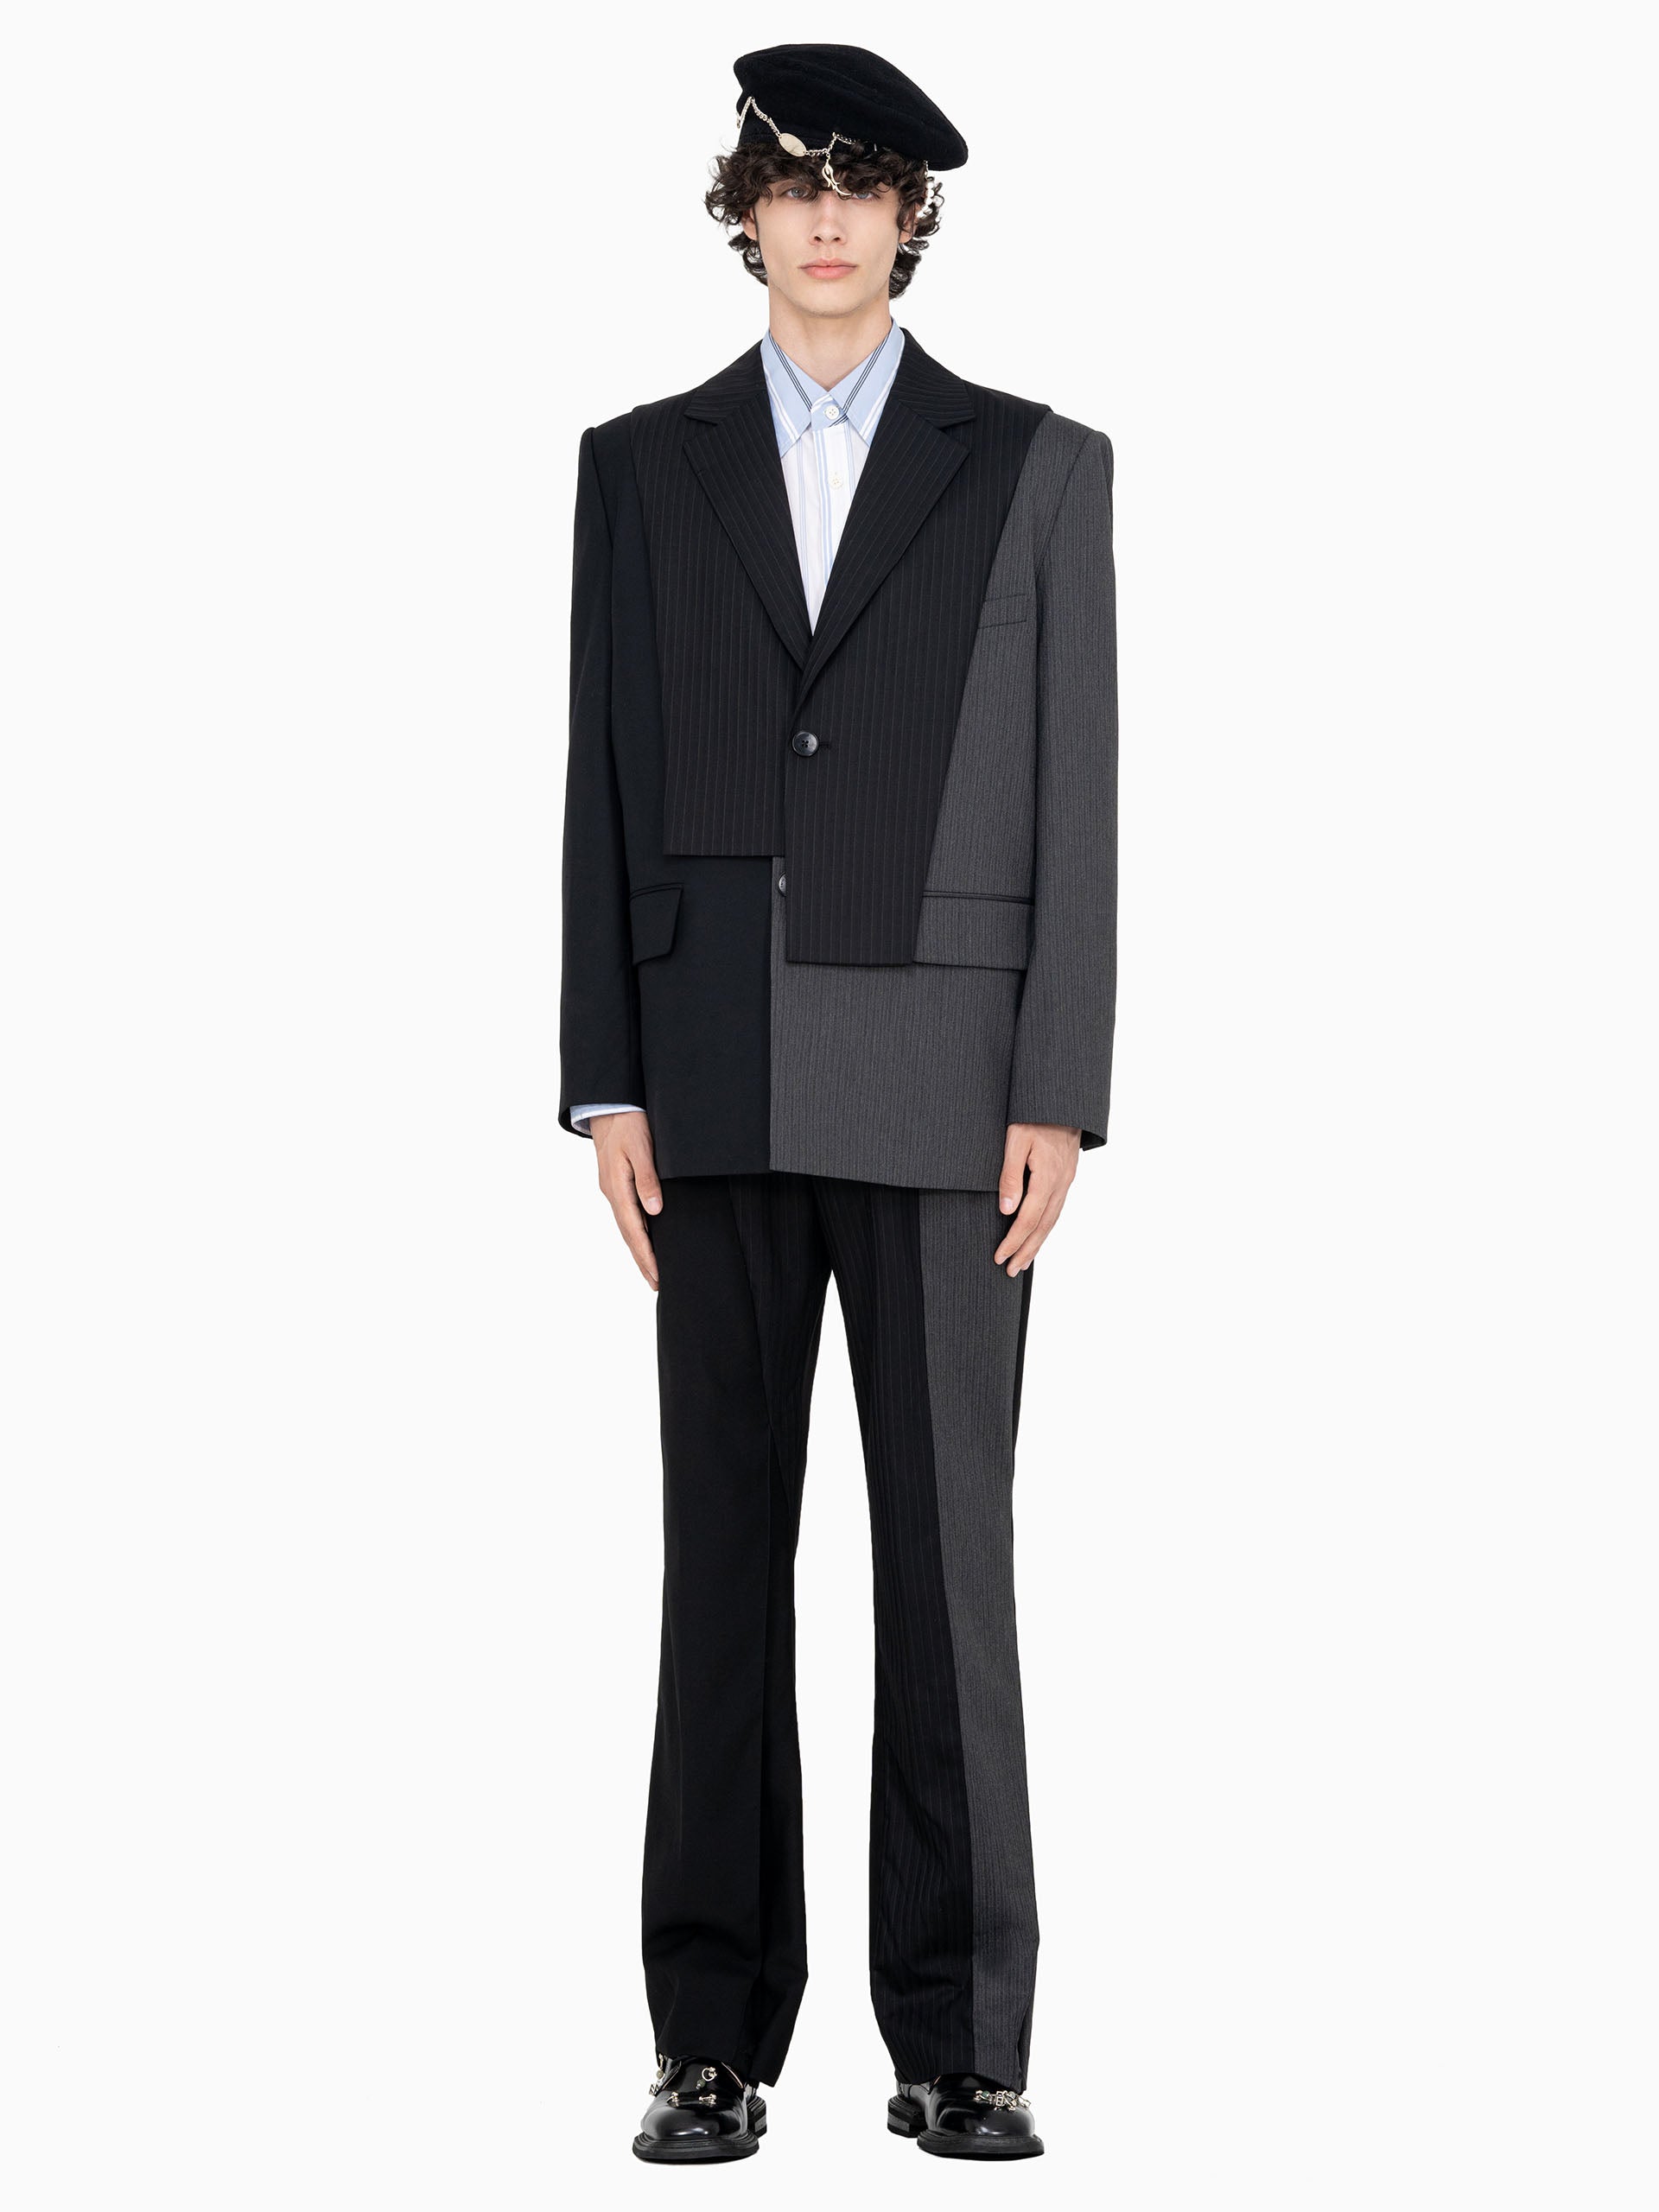 DECONSTRUCTED TWO PIECE SUIT